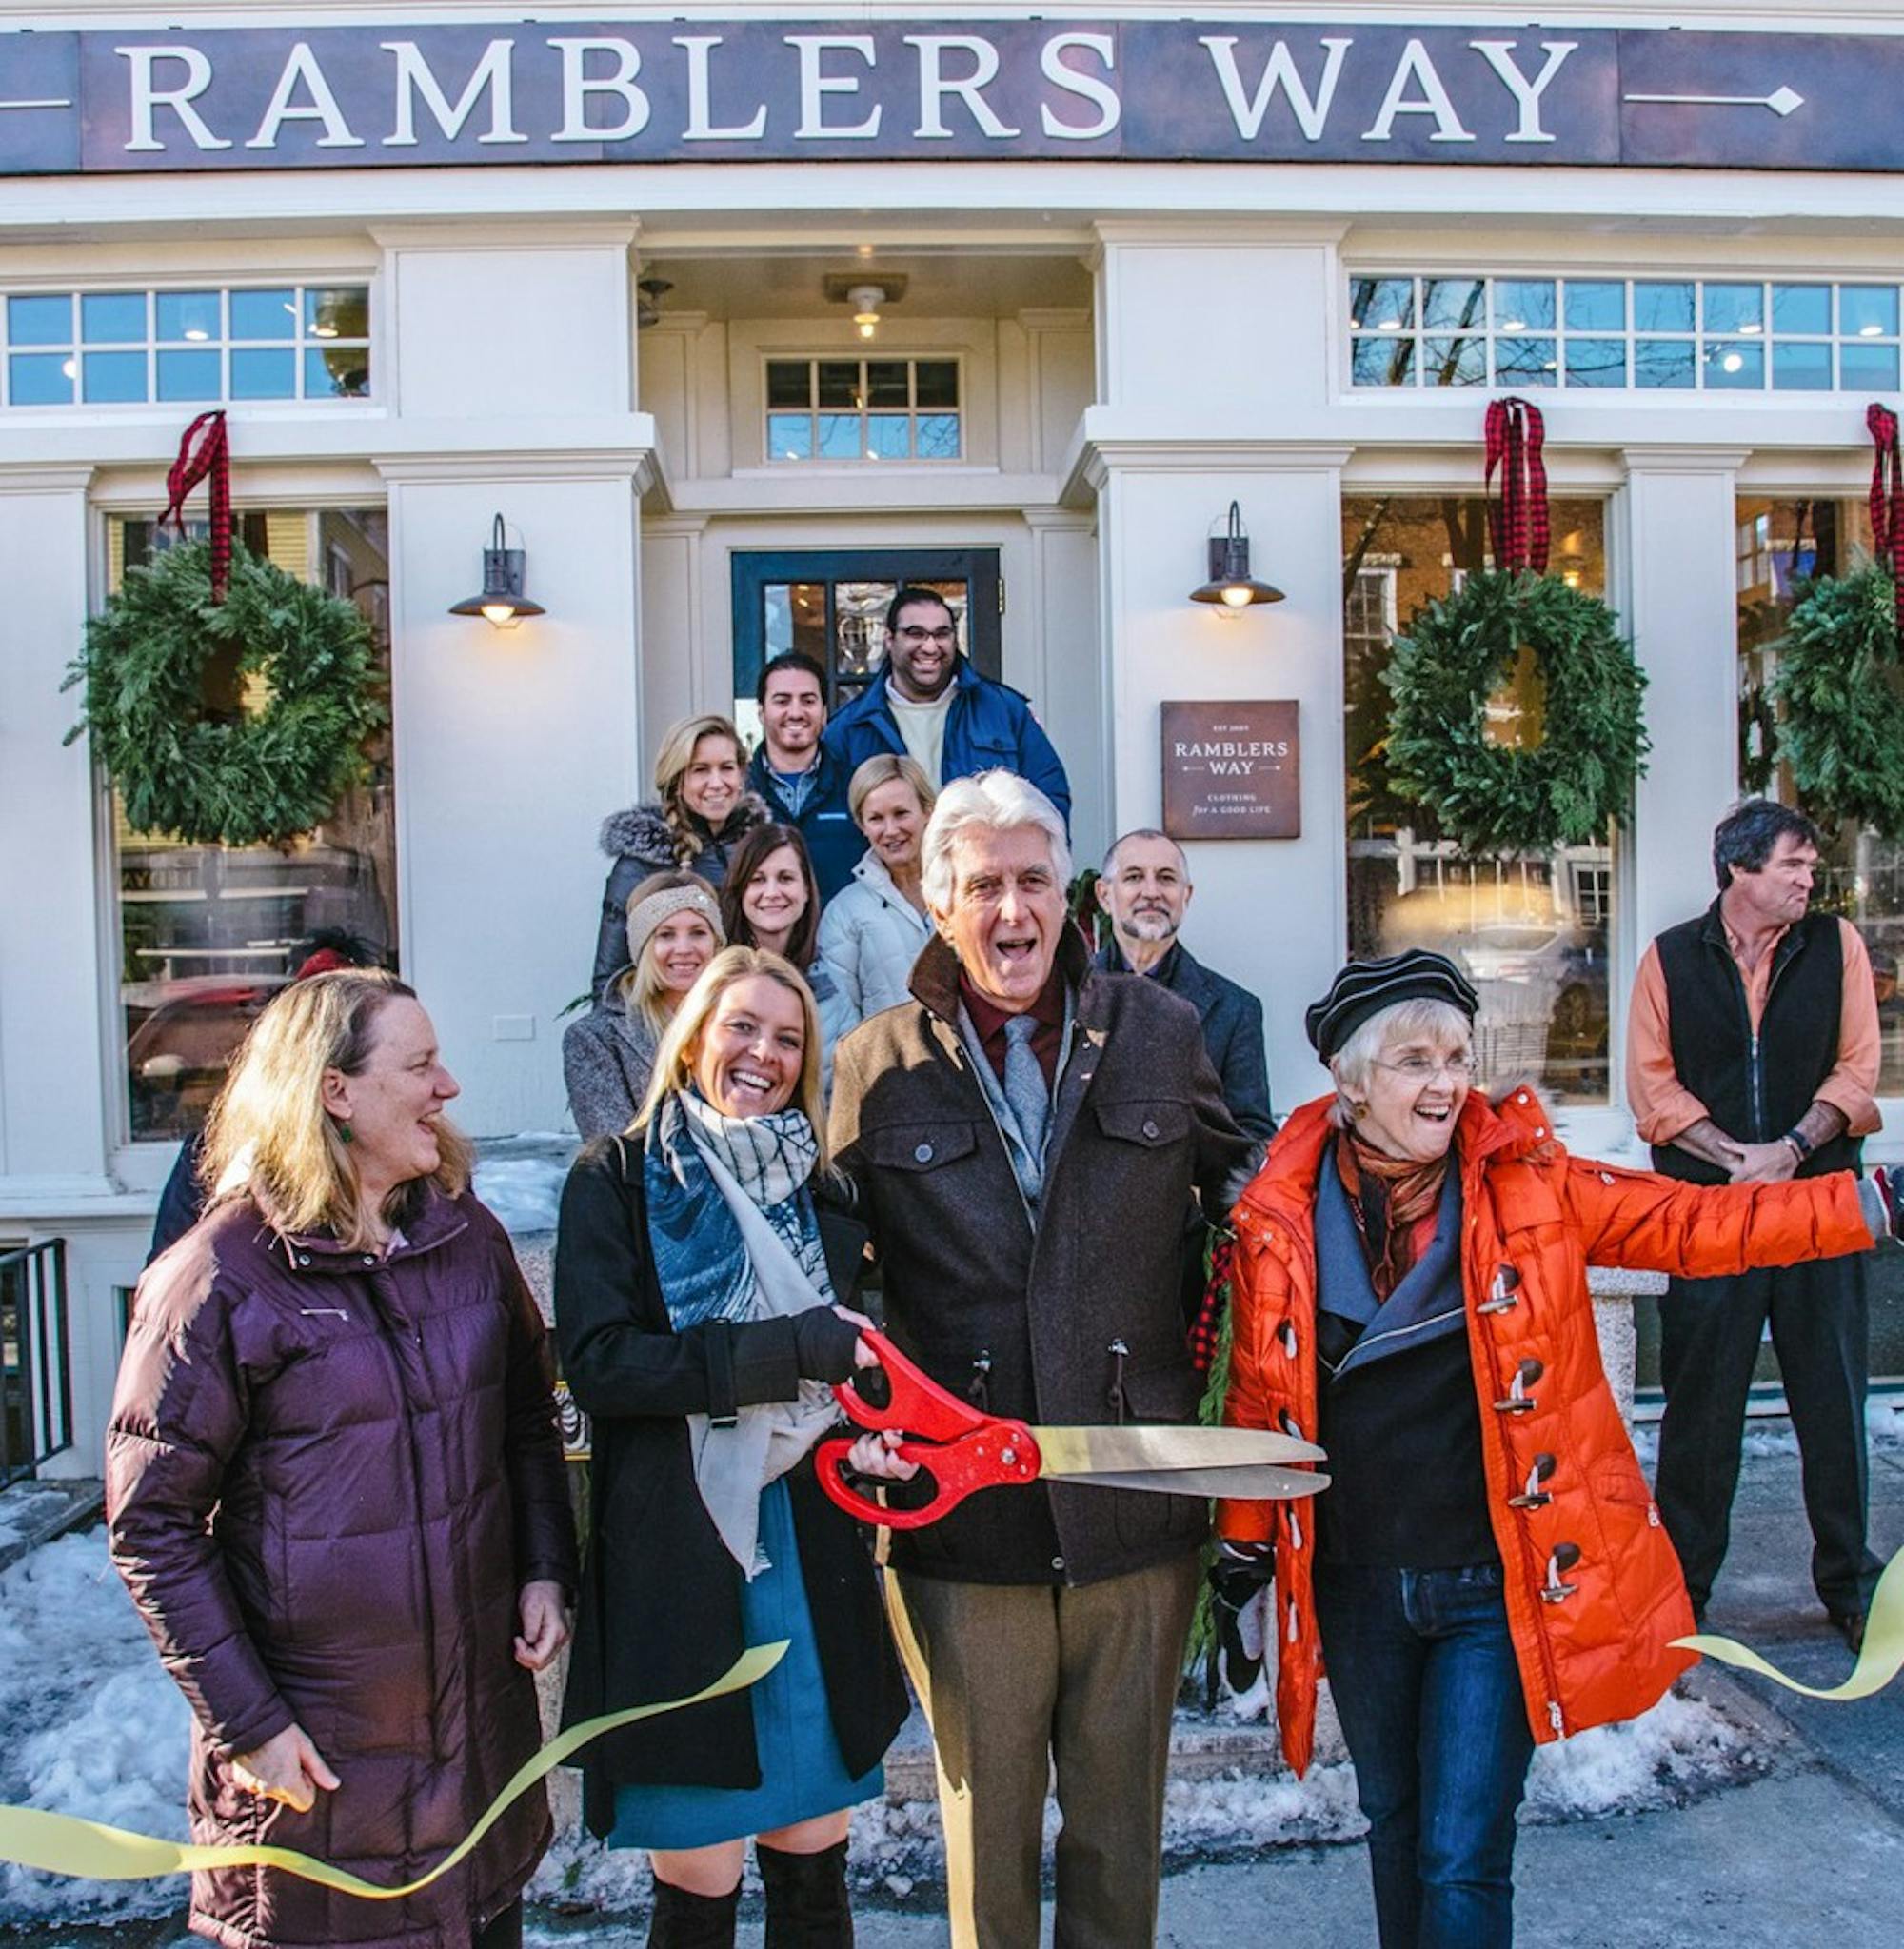 Ramblers Way chose to open its second retail store in Hanover. Its flagship store is located in Kennewick, Maine.